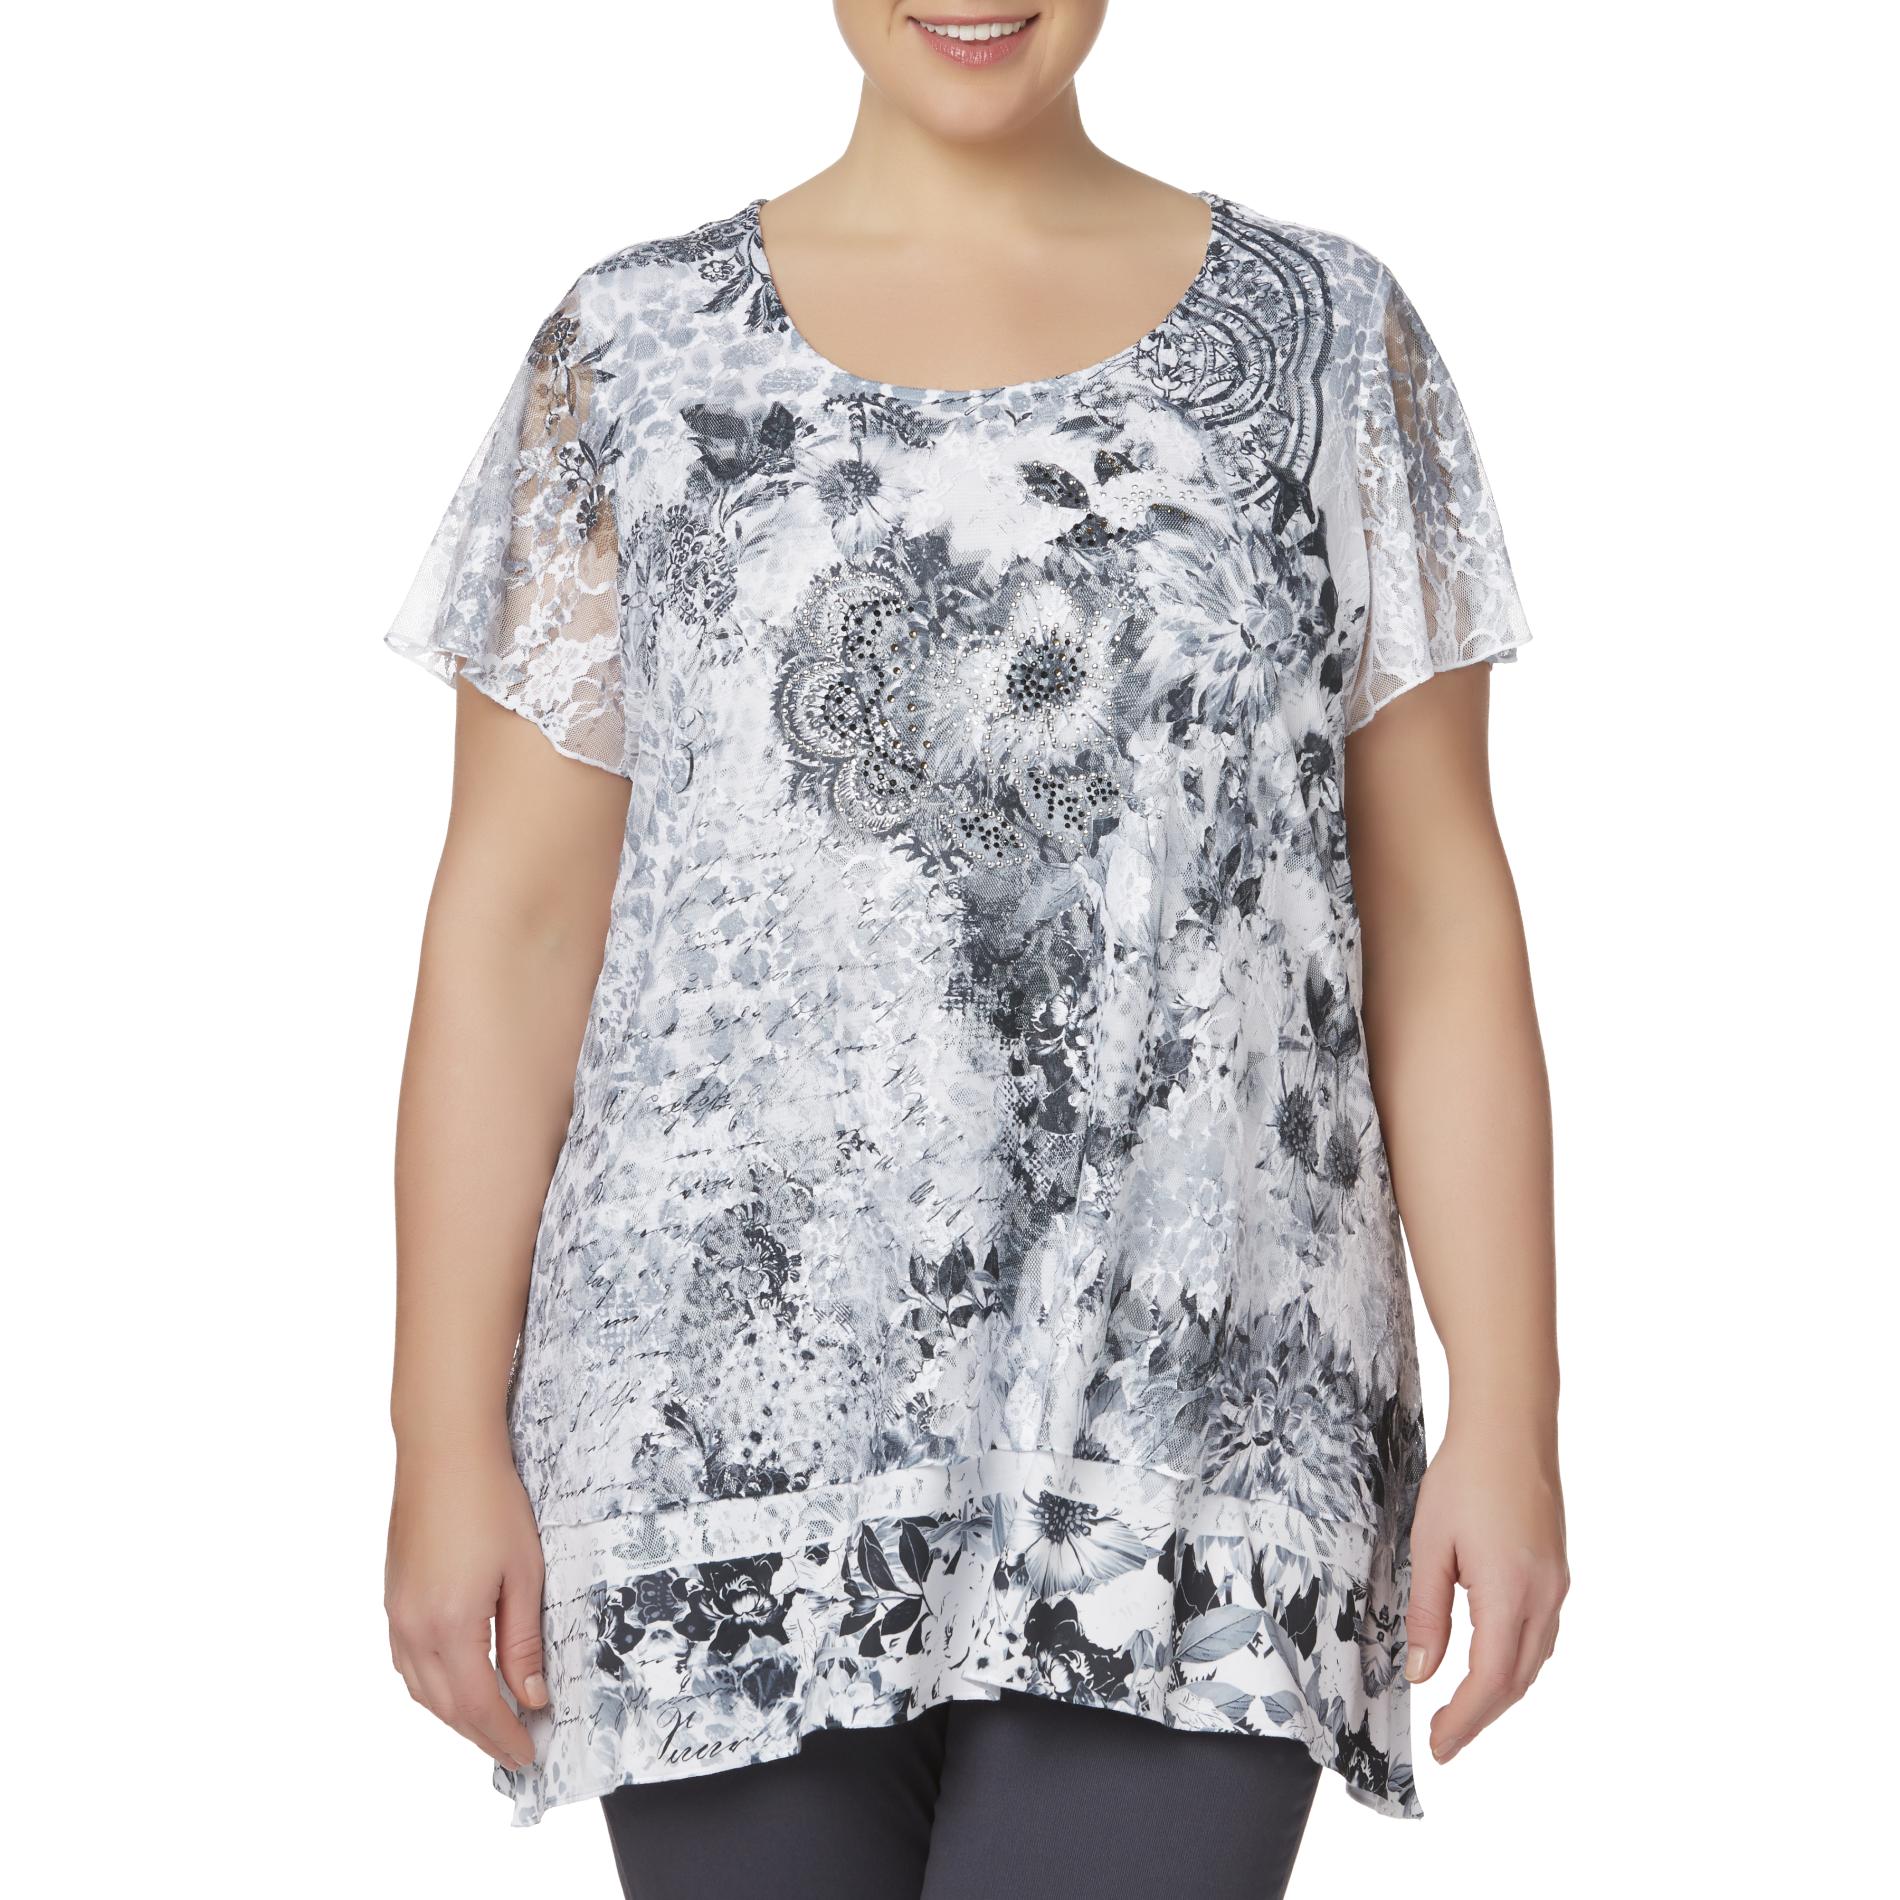 Simply Emma Women's Plus Lace Overlay Sublimation Top - Floral